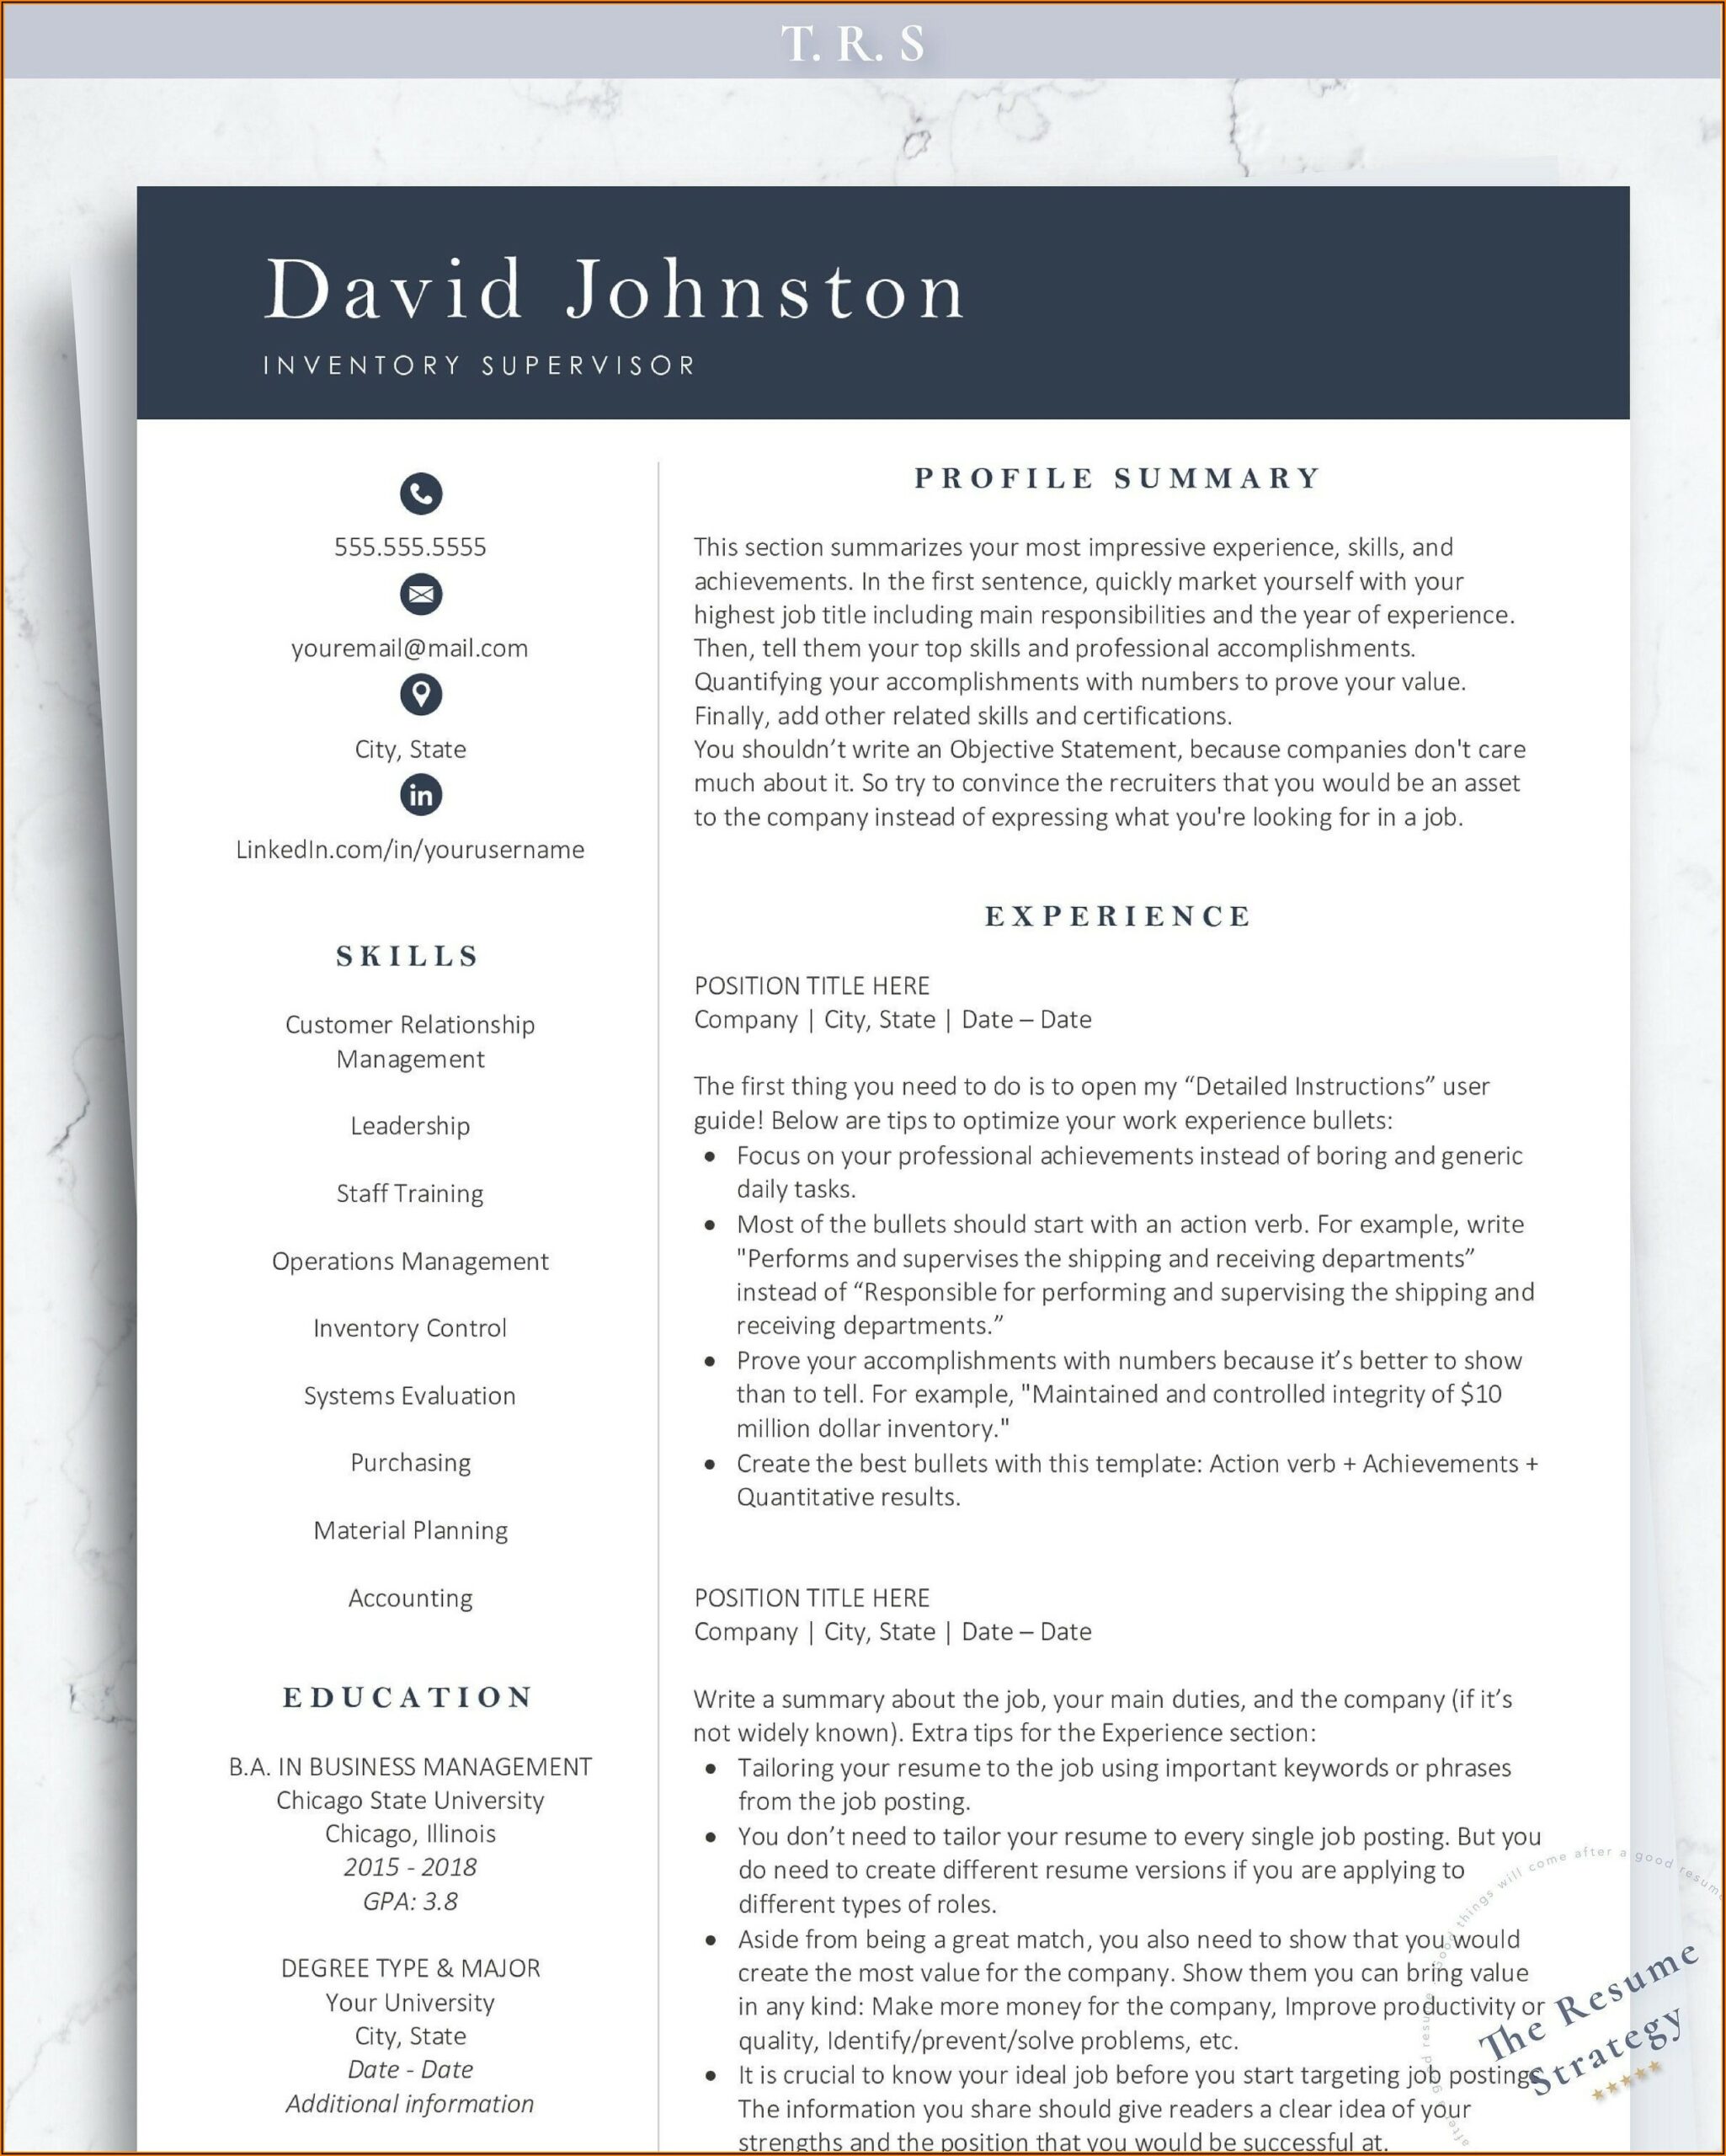 Word File Template For Resume